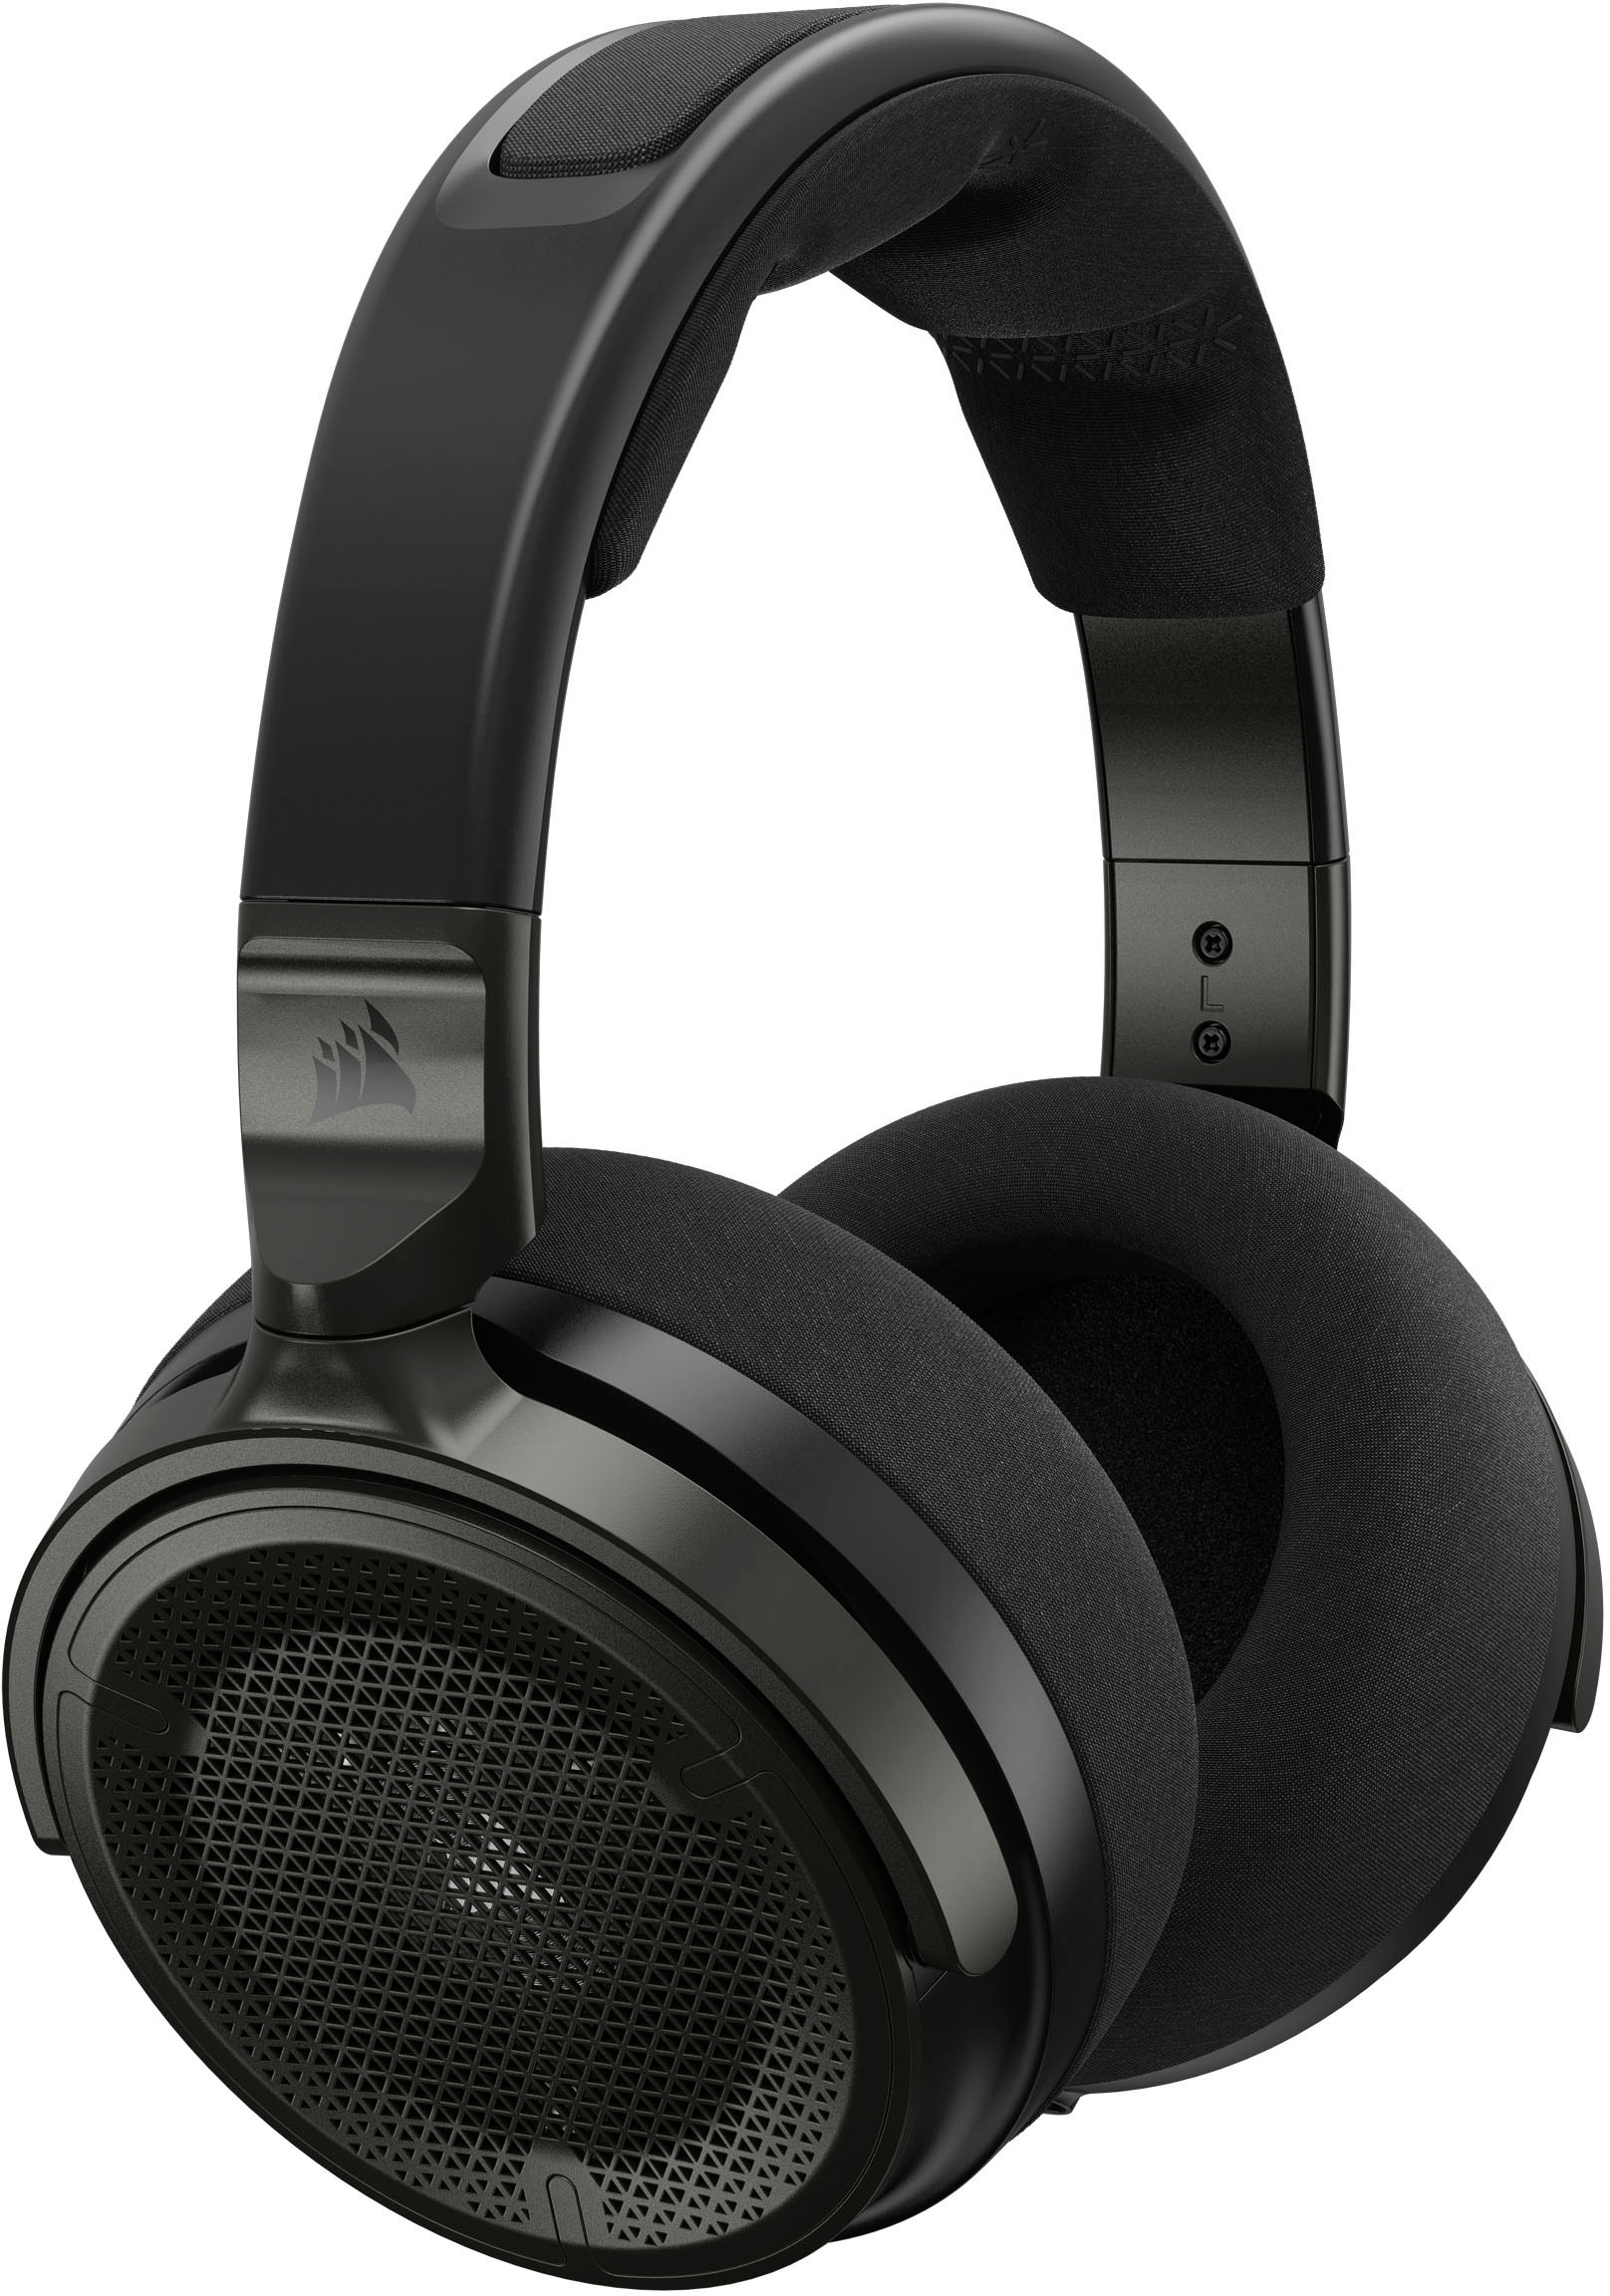 Buy - Headset CA-9011370-NA Best CORSAIR Streaming/Gaming VIRTUOSO PRO Back Carbon Open Wired